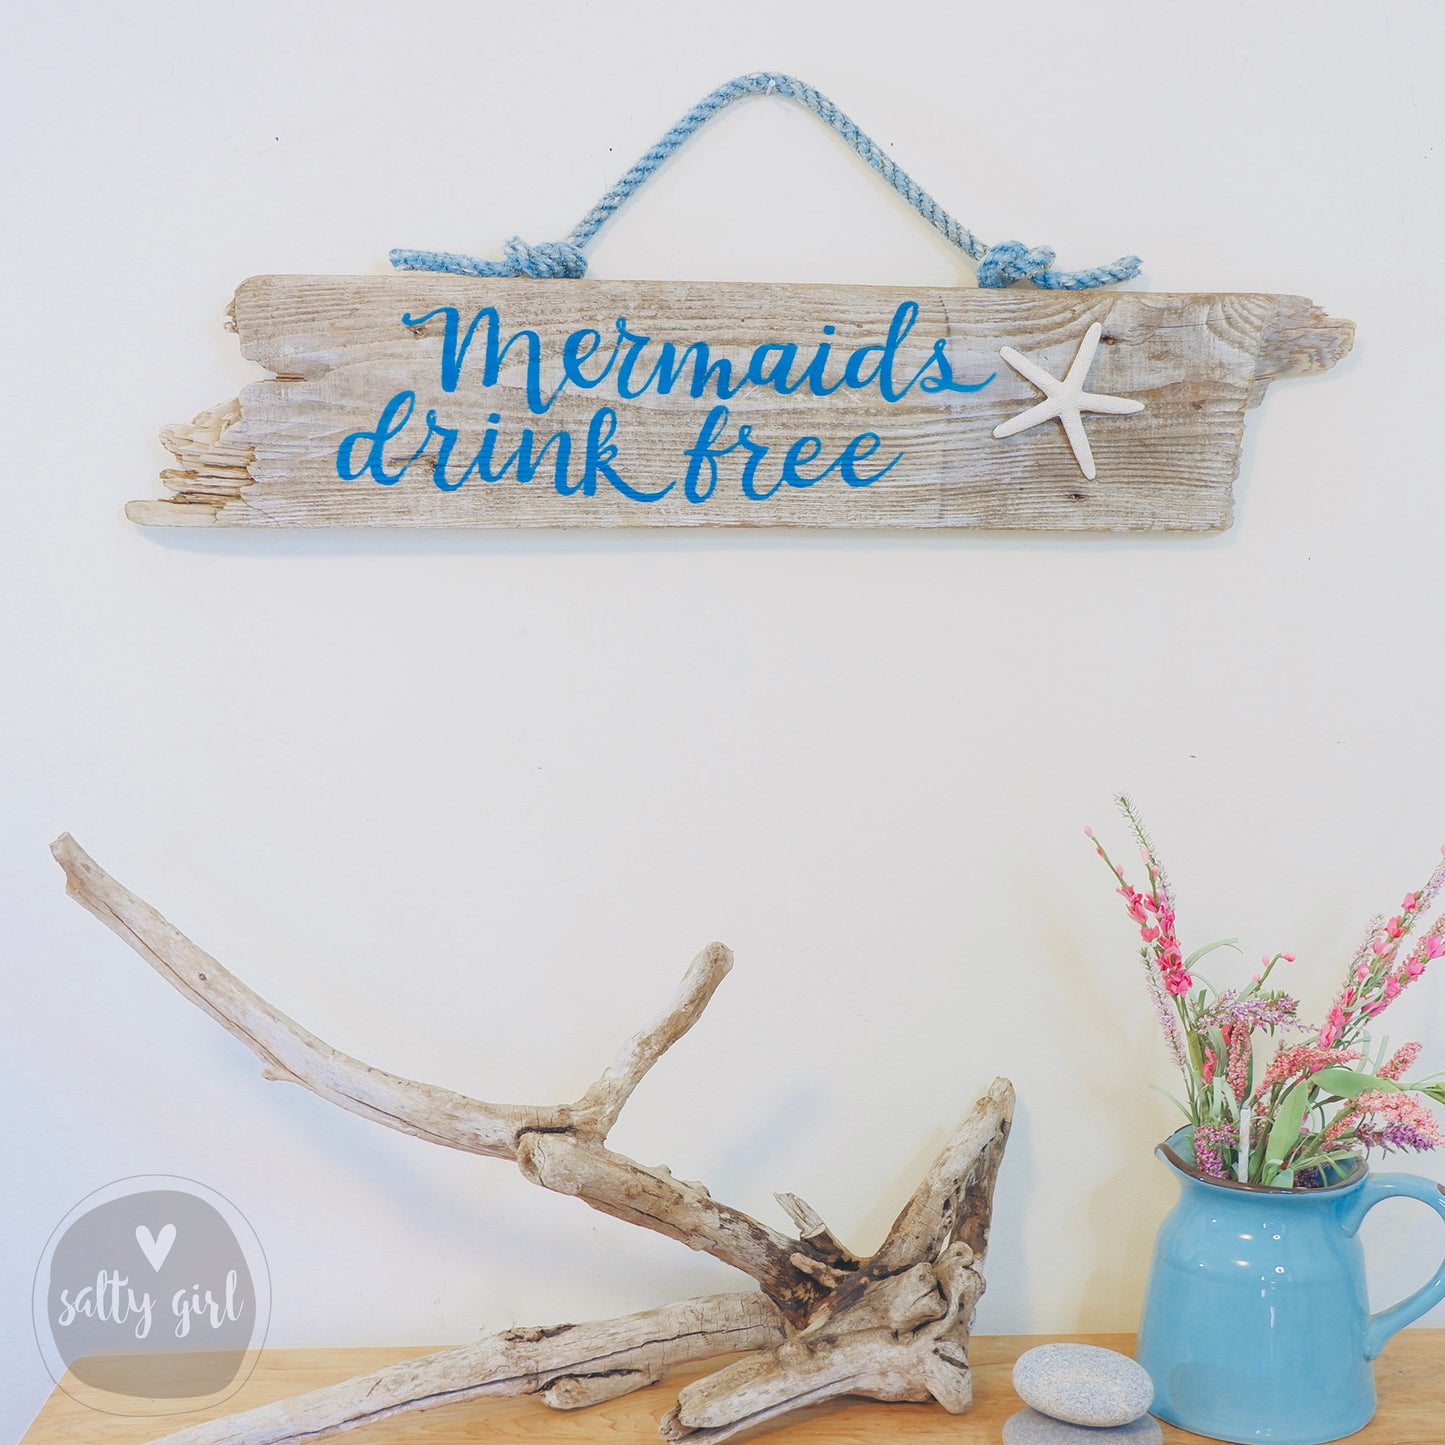 Driftwood "Mermaids Drink Free" Sign - Wooden Mermaid Sign with Fishing Rope Hanger and Starfish - Beachie Wall Decor